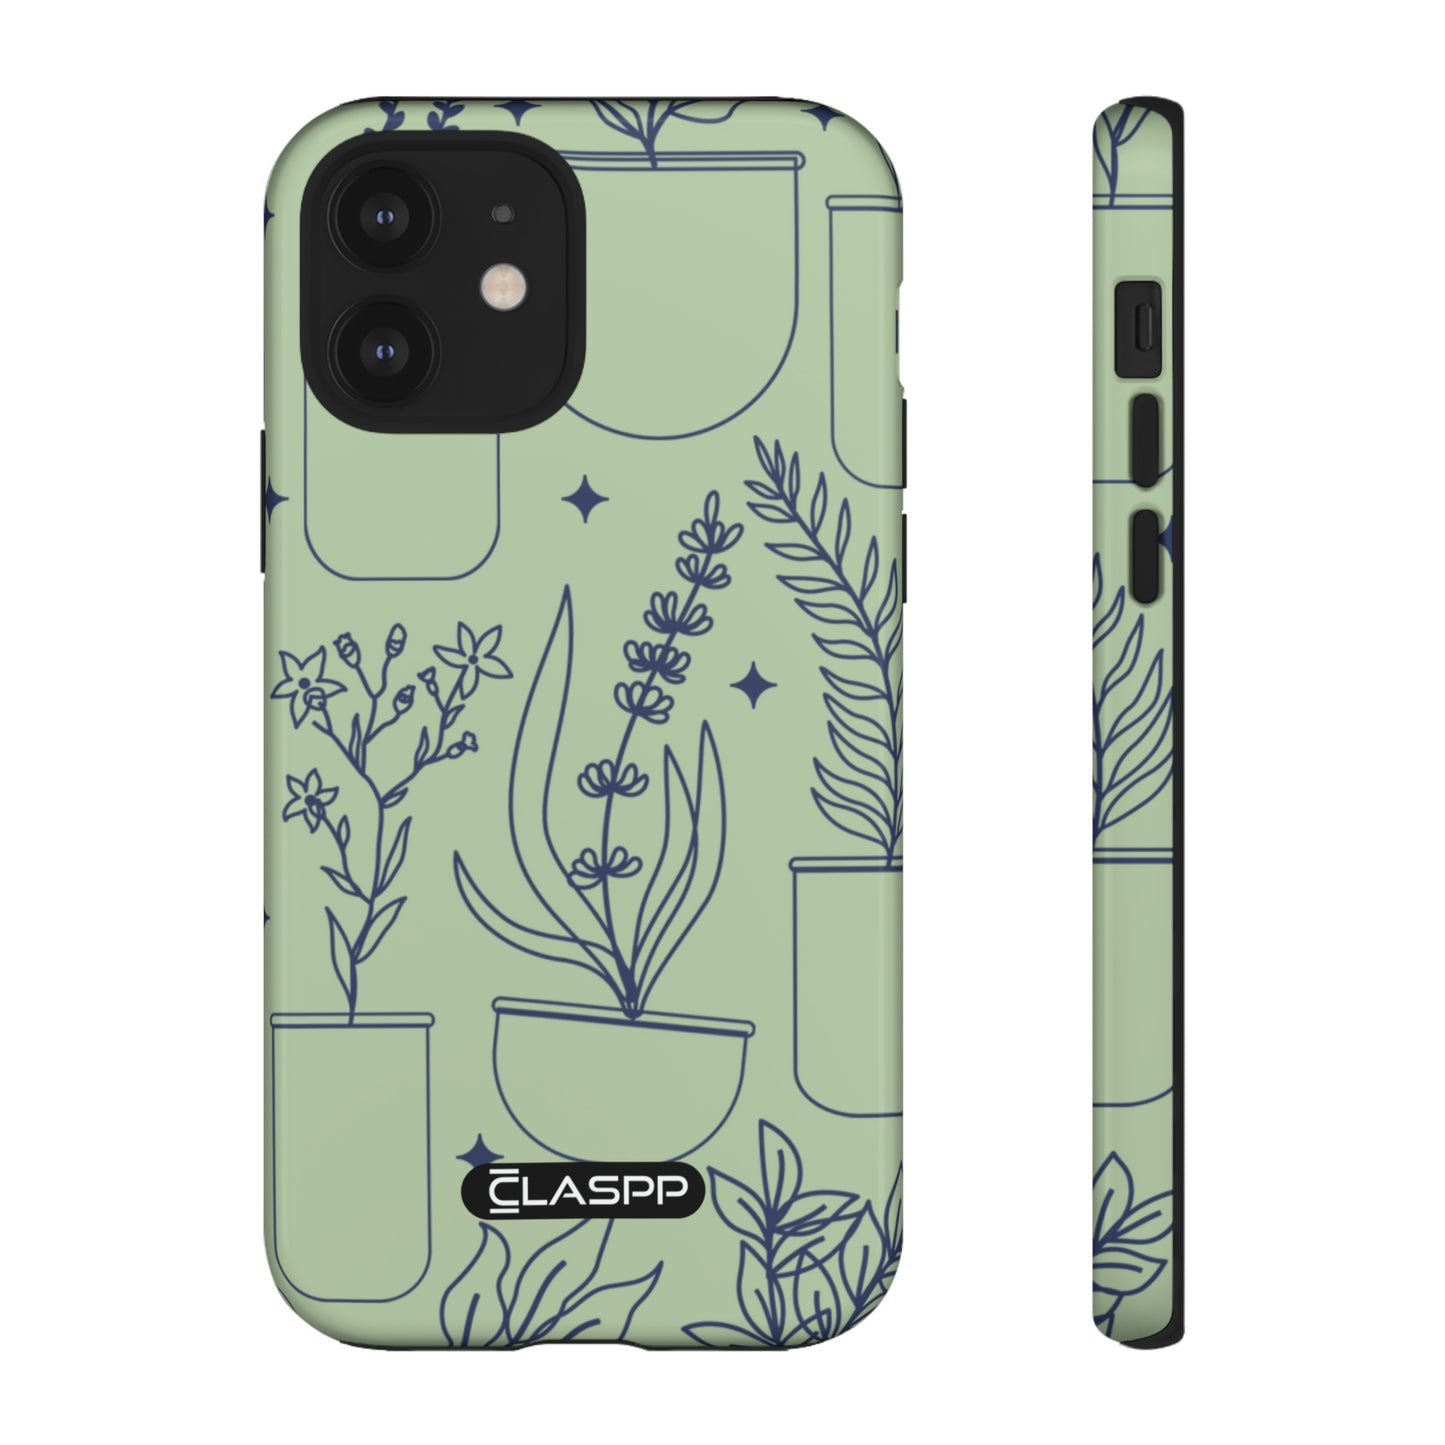 Horticulturist | Hardshell Dual Layer Phone Case